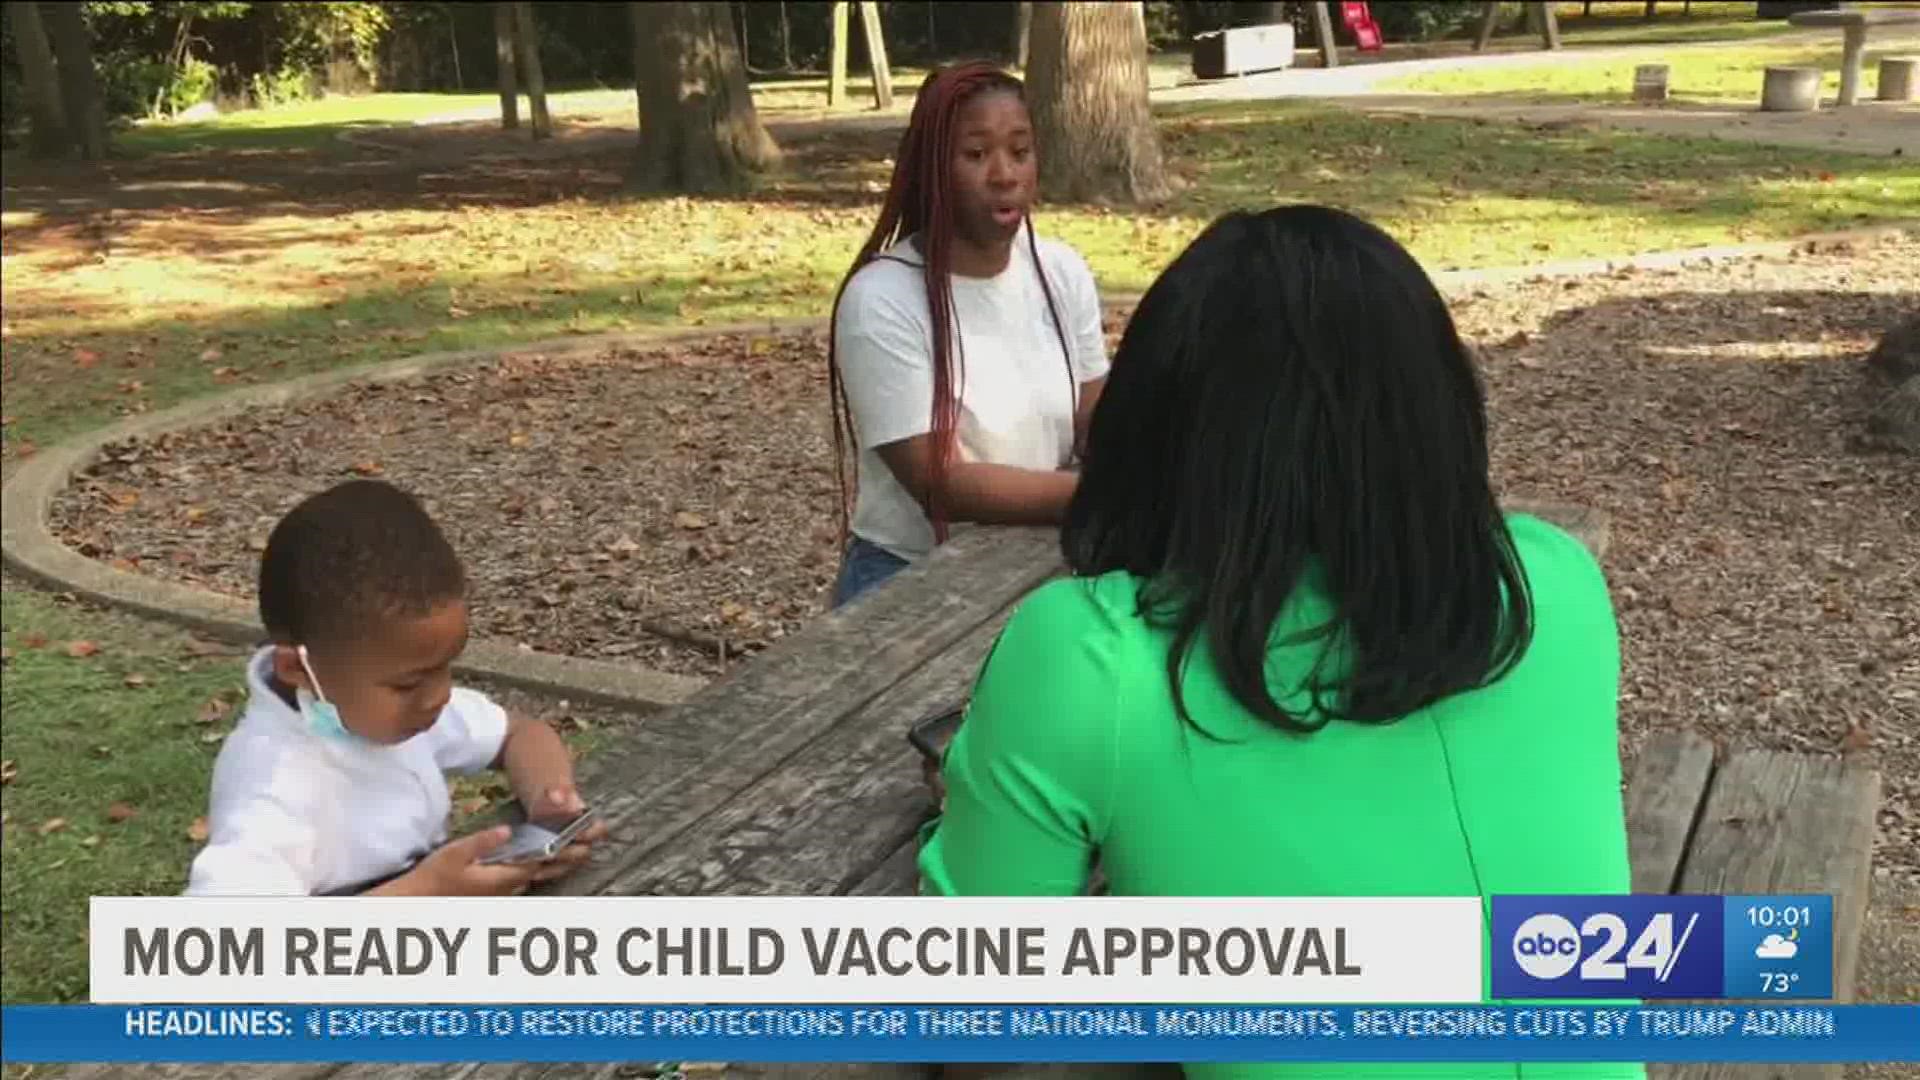 Currently, Pfizer vaccines are only authorized for children 12 and up. But the company has asked the FDA to approve its COVID vaccine for 5-11 year-olds.